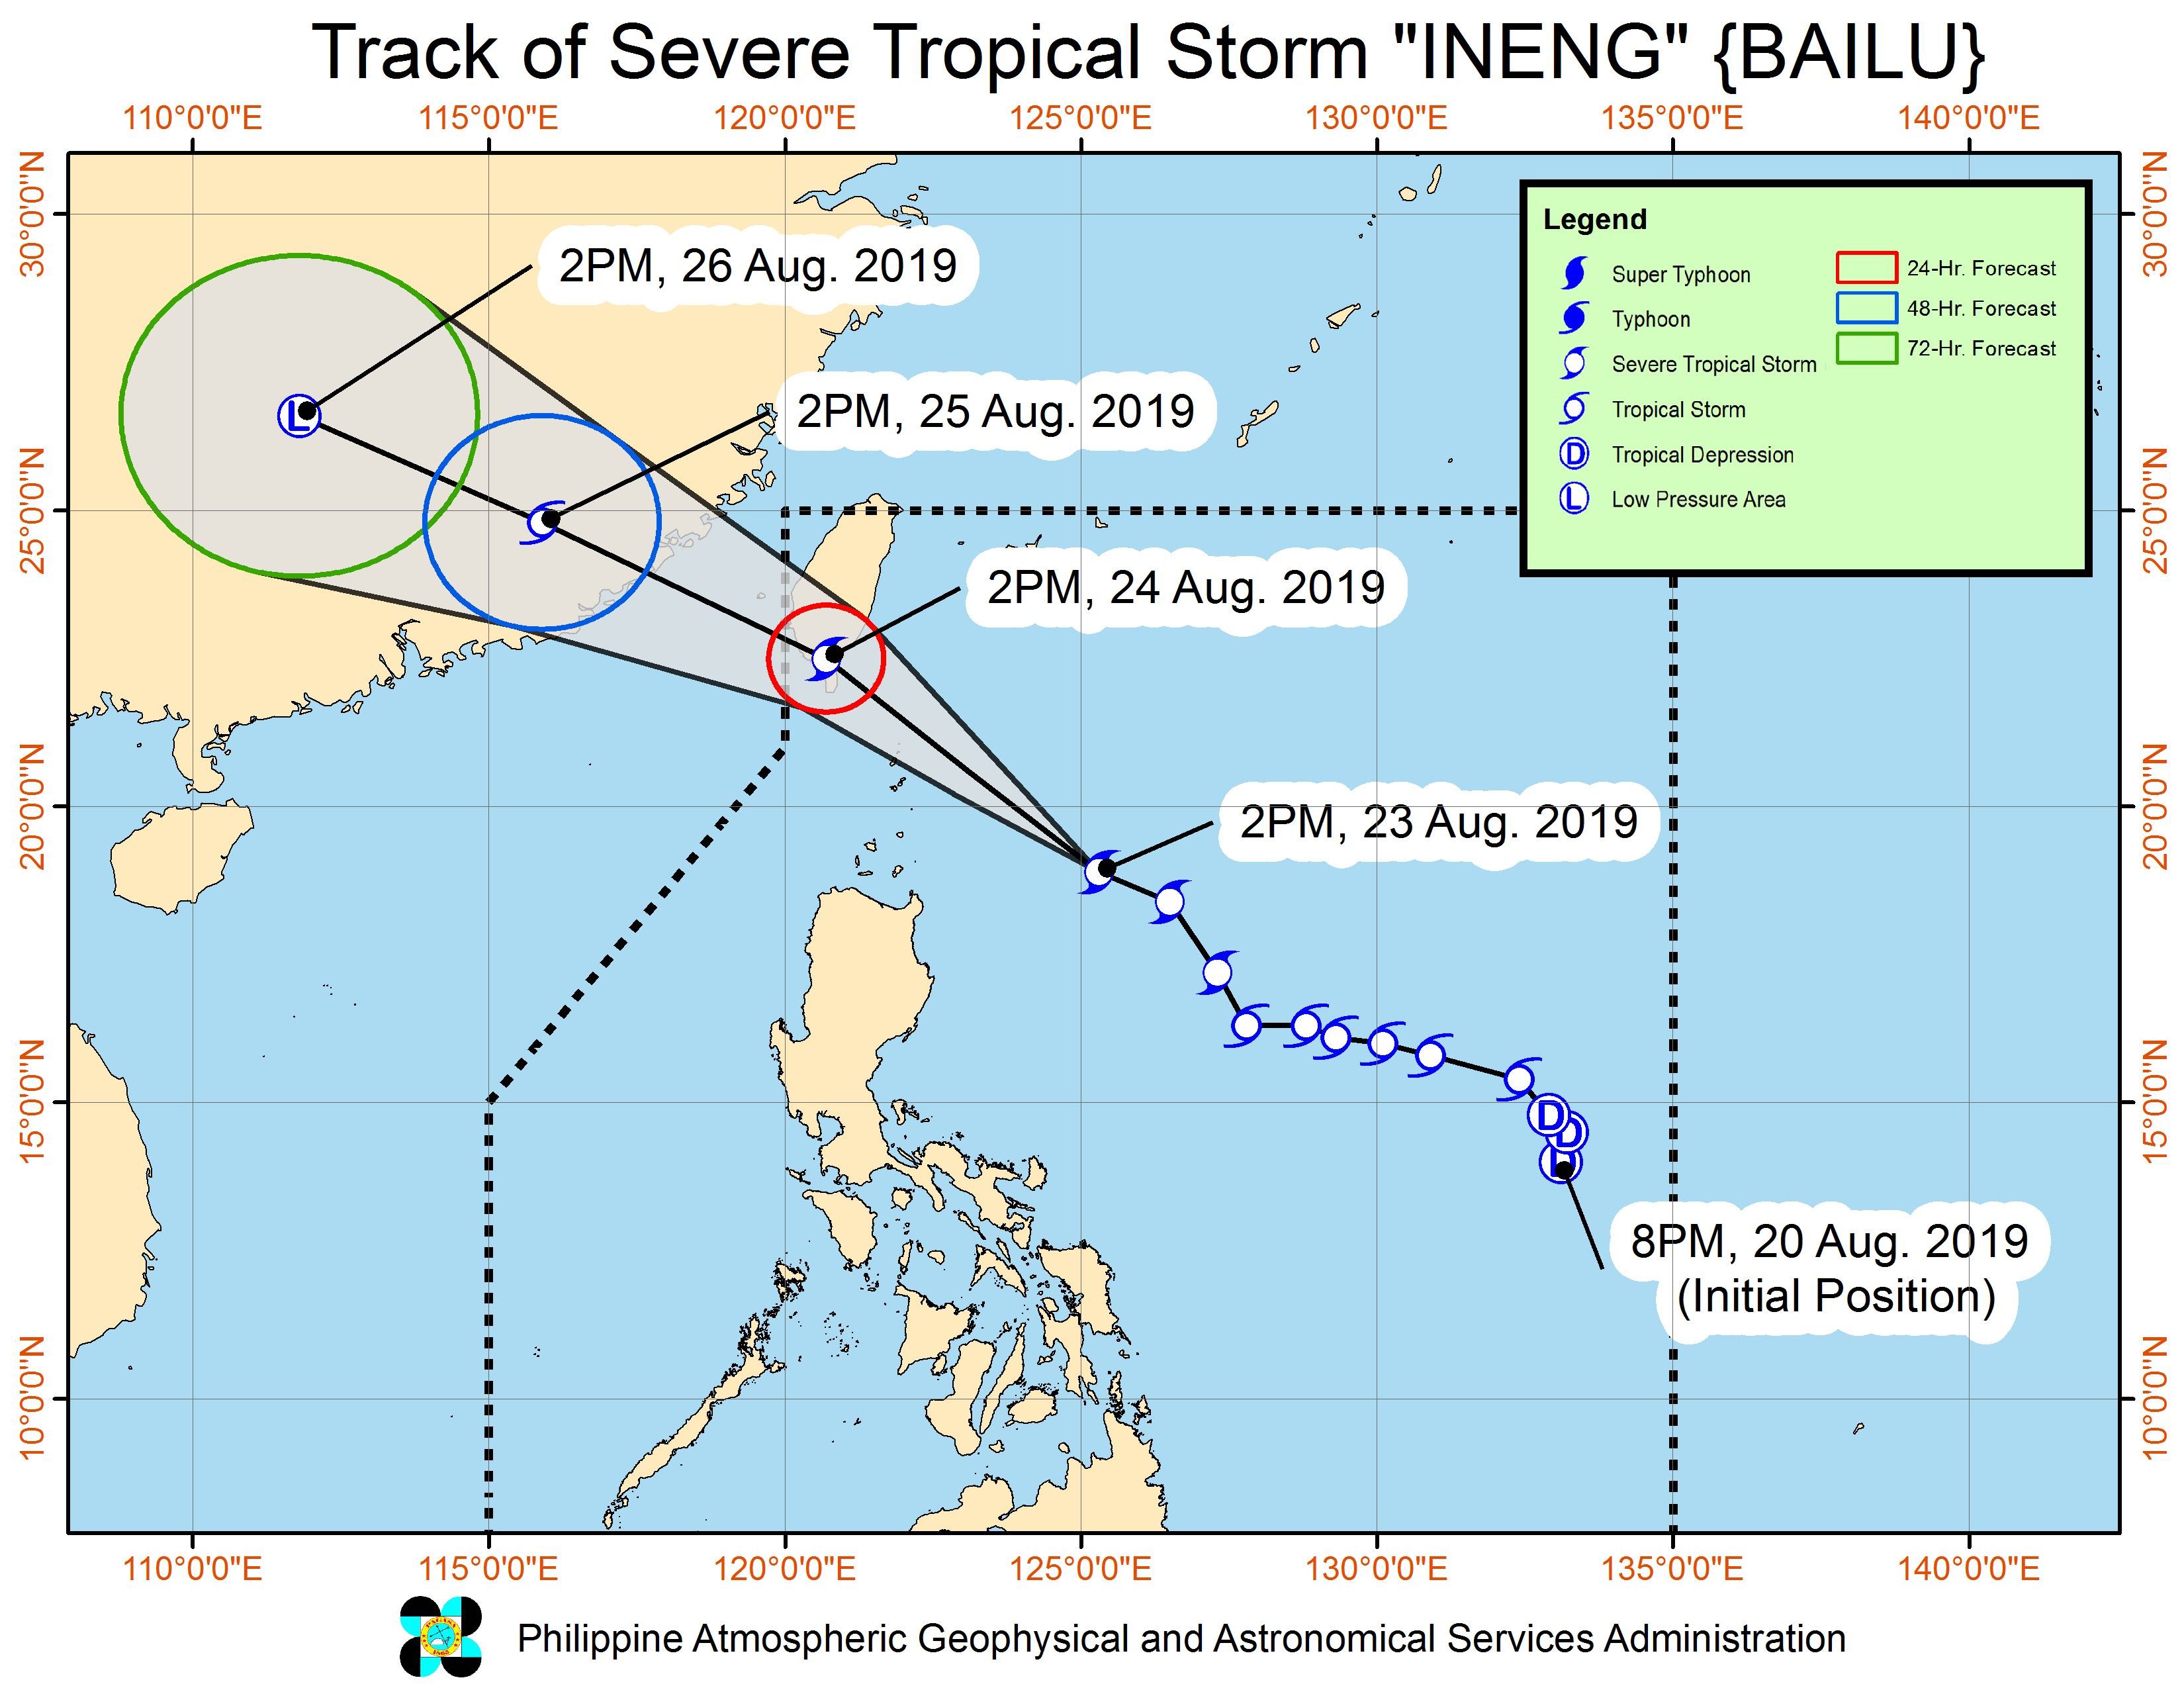 Forecast track of Severe Tropical Storm Ineng (Bailu) as of August 23, 2019, 5 pm. Image from PAGASA 